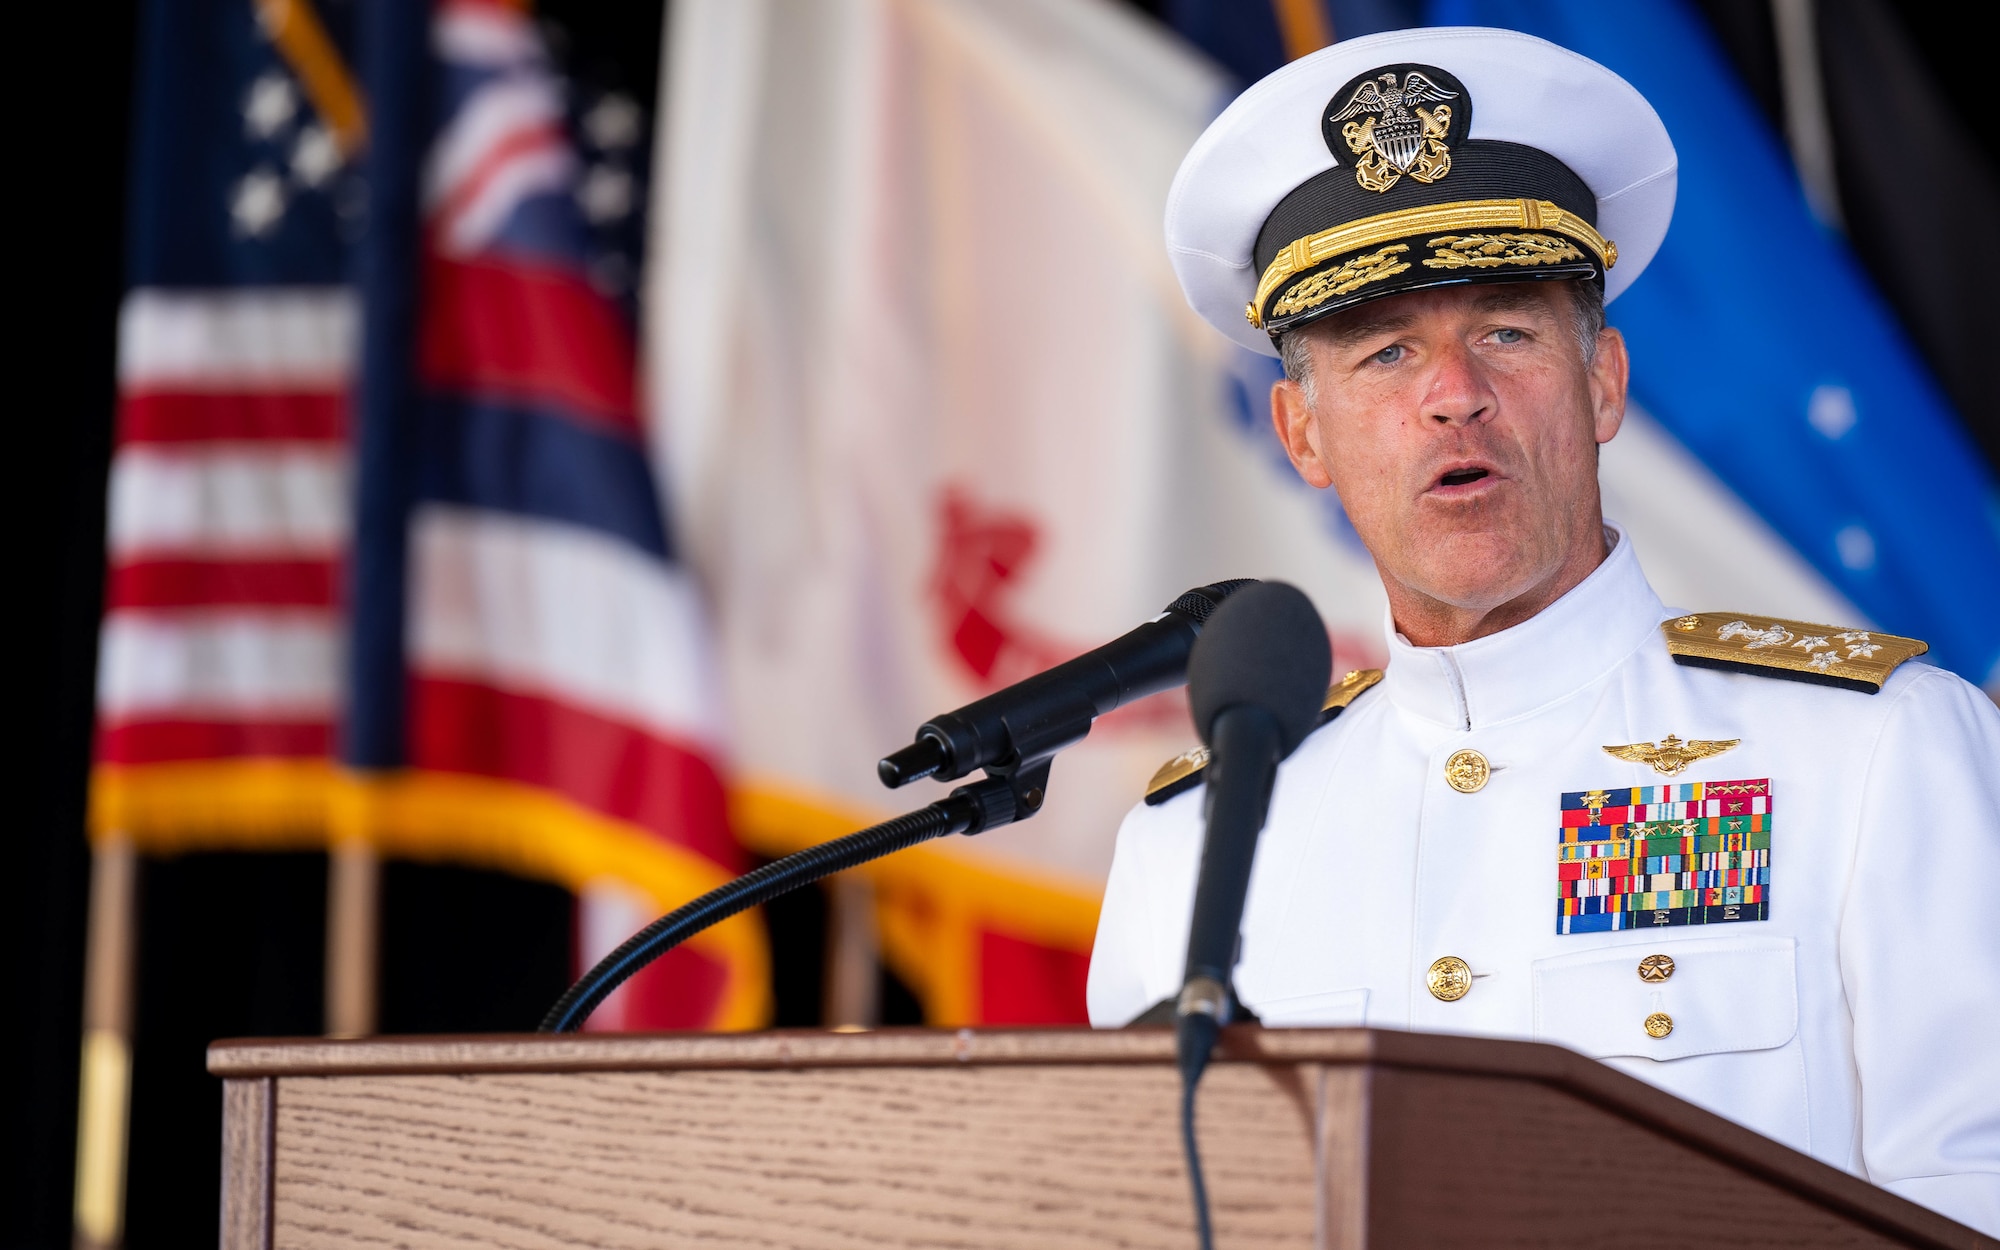 Adm. John C. Aquilino, Commander of U.S. Indo-Pacific Command, speaks during the United States Space Forces, Indo-Pacific, activation ceremony hosted by USINDOPACOM. USSPACEFORINDOPAC will serve as the space-domain authority to USINDOPACOM, advancing the capabilities of the joint force and promoting a free and open Indo-Pacific. (U.S. Navy photo by Mass Communication Specialist 1st Class Anthony J. Rivera)